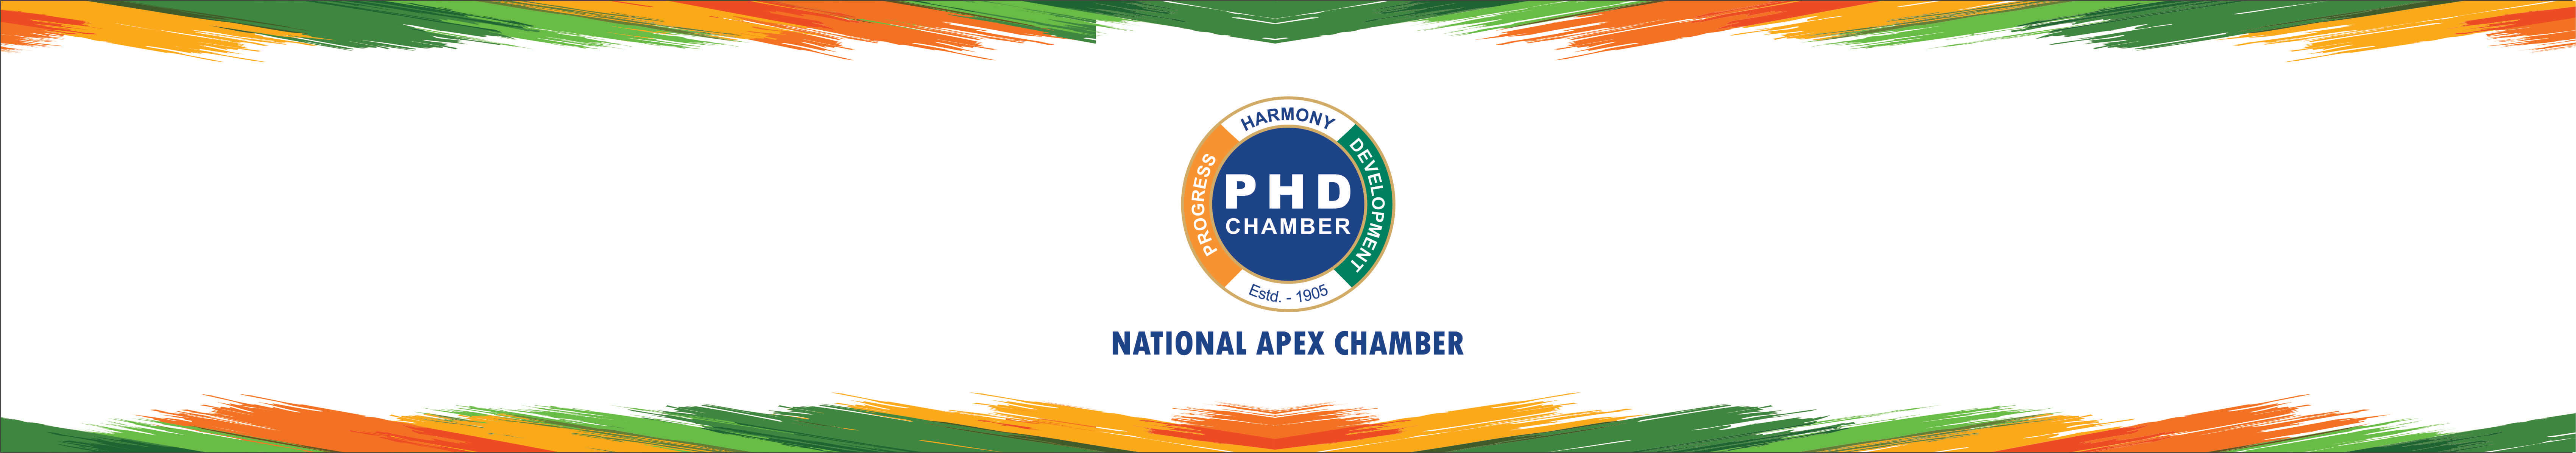 what is phd chamber of commerce